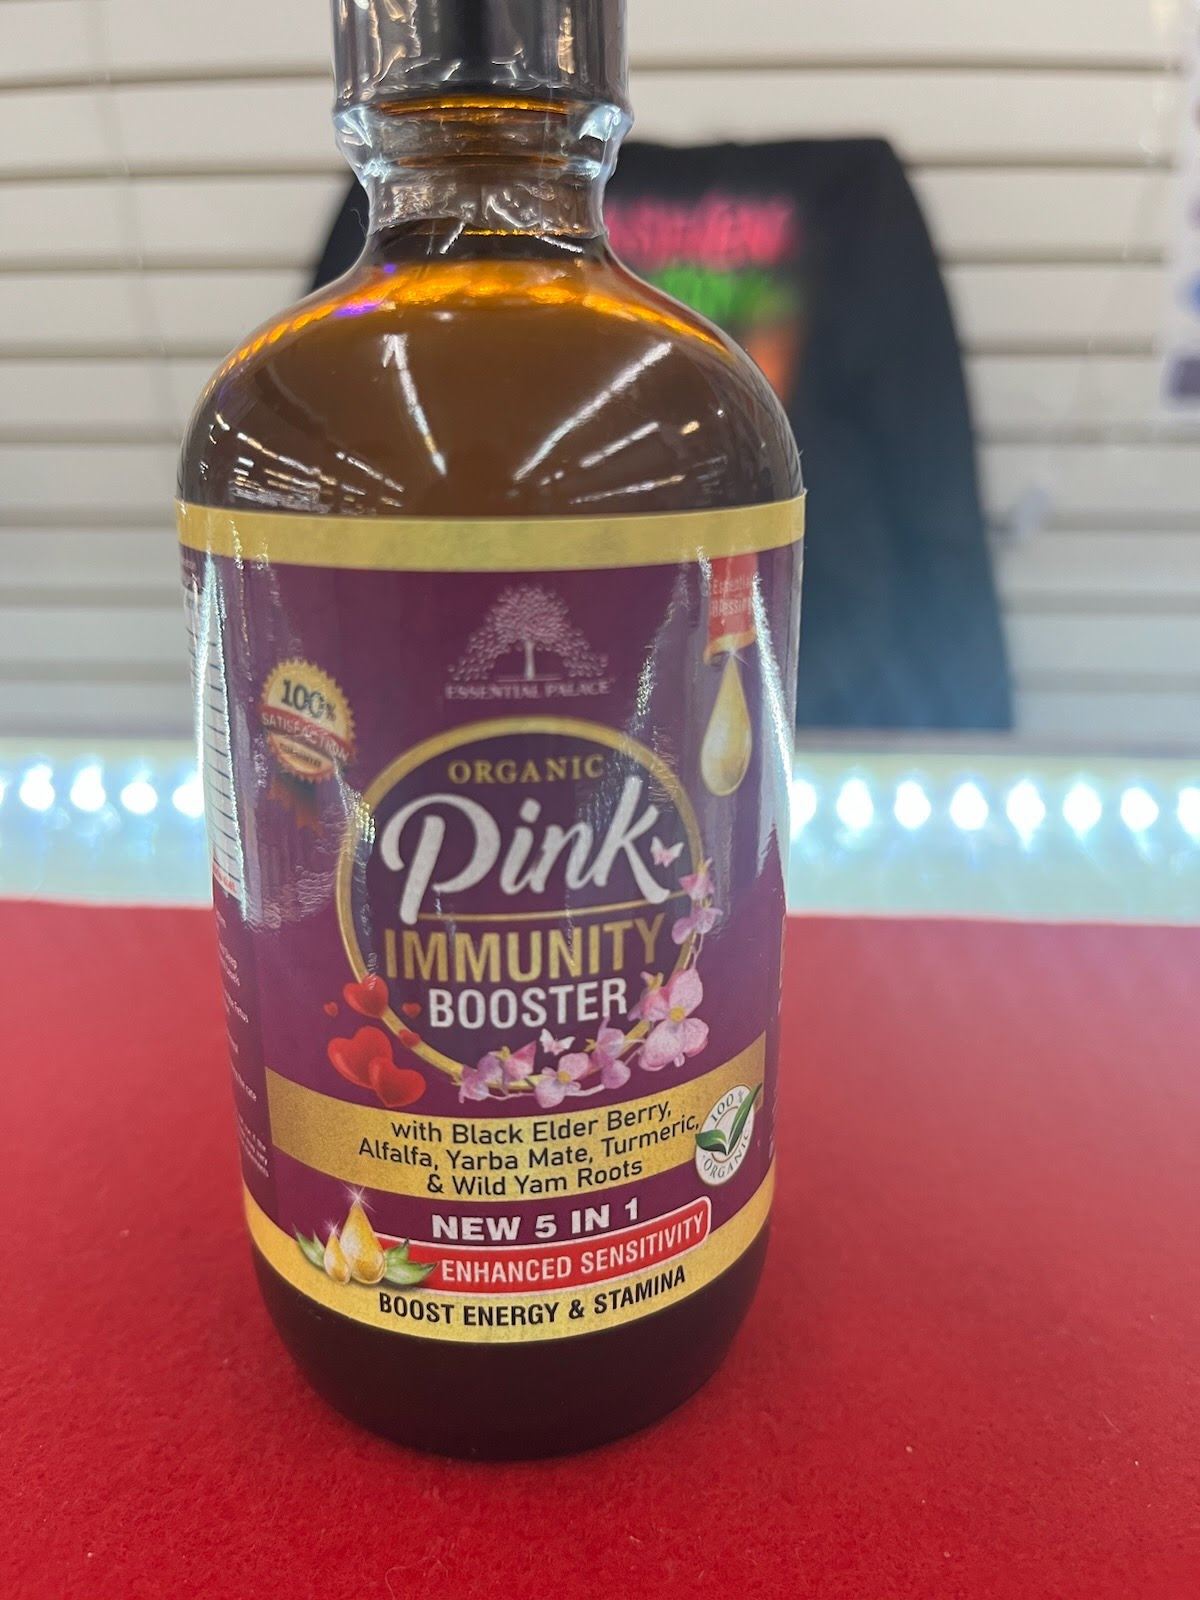 A bottle of pink immunity booster on a table.